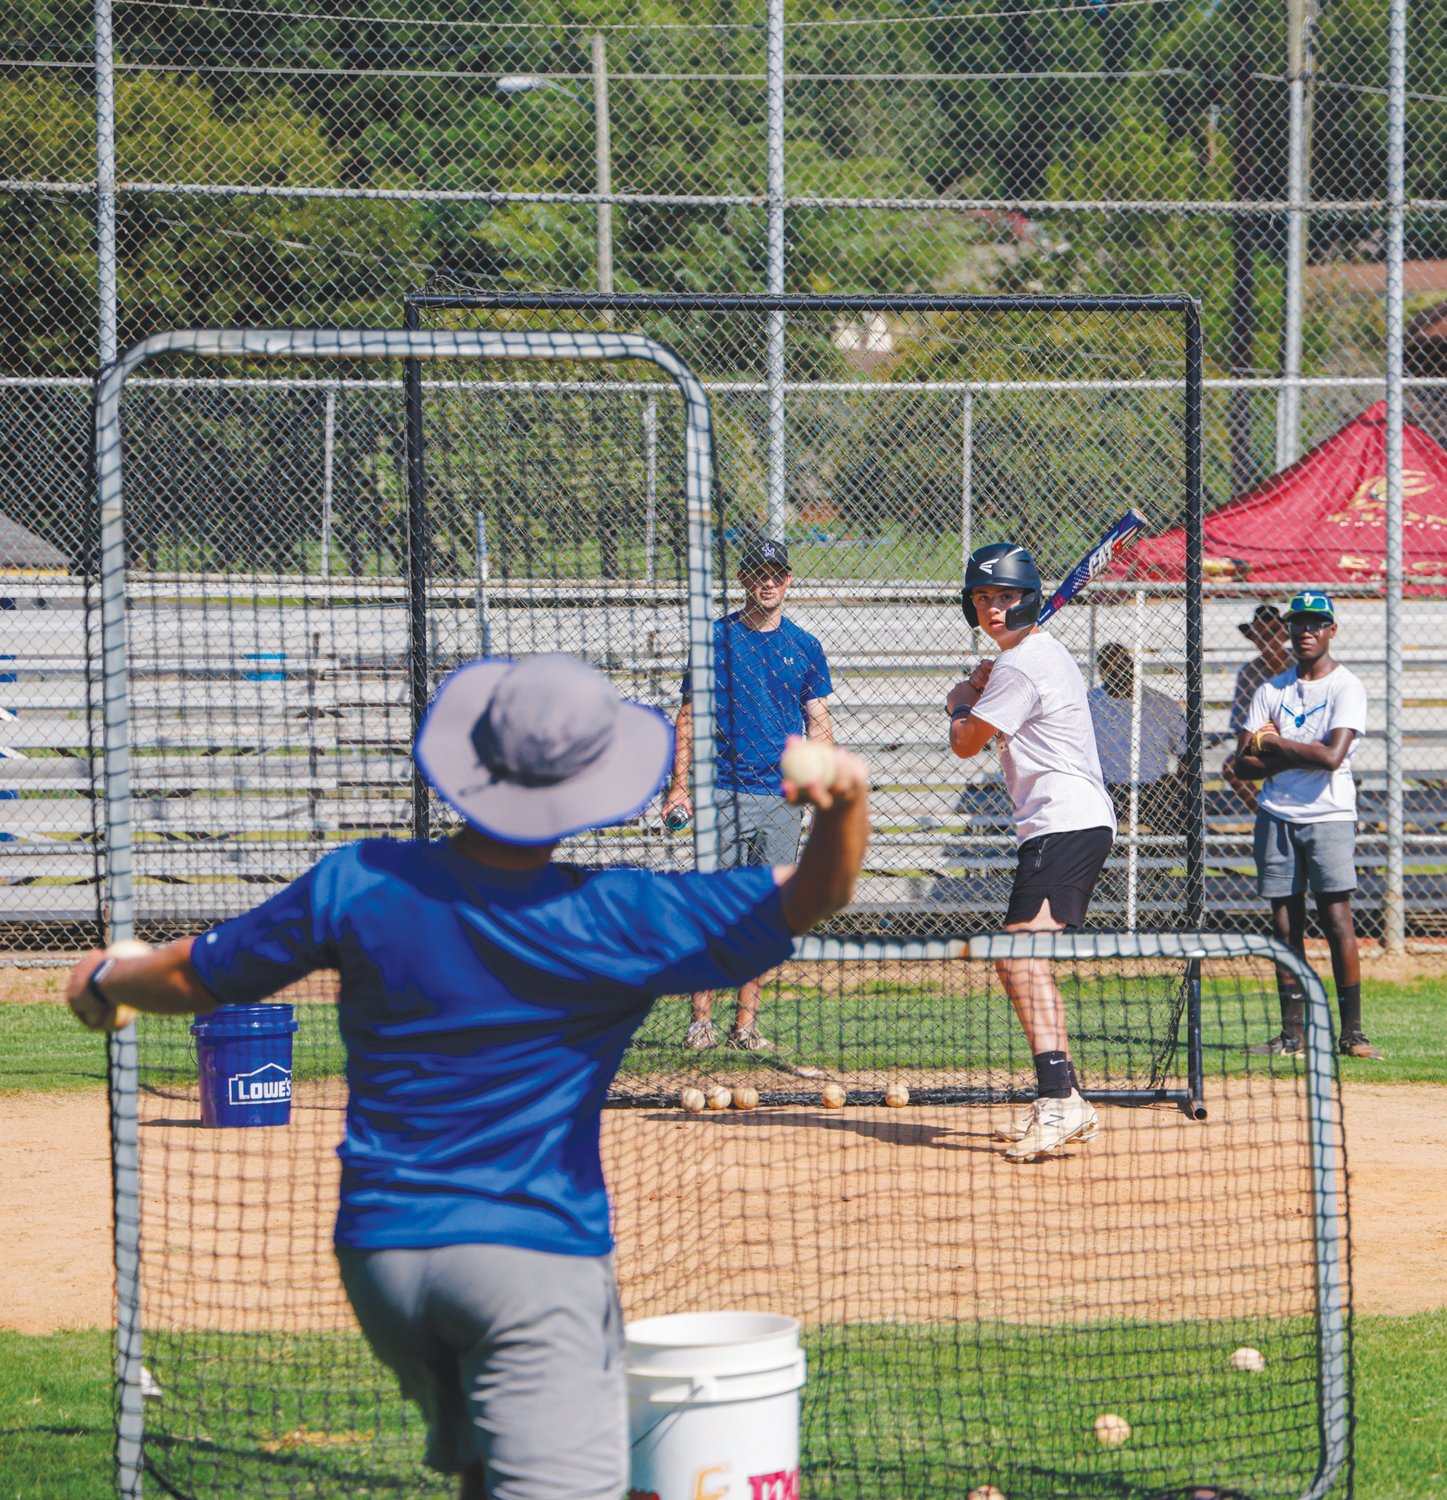 Jordan-Matthews assistant baseball coach Will Felder (front) throws a pitch behind the L-screen to camper Will Beck during the final day of the Jets' baseball camp last Thursday.